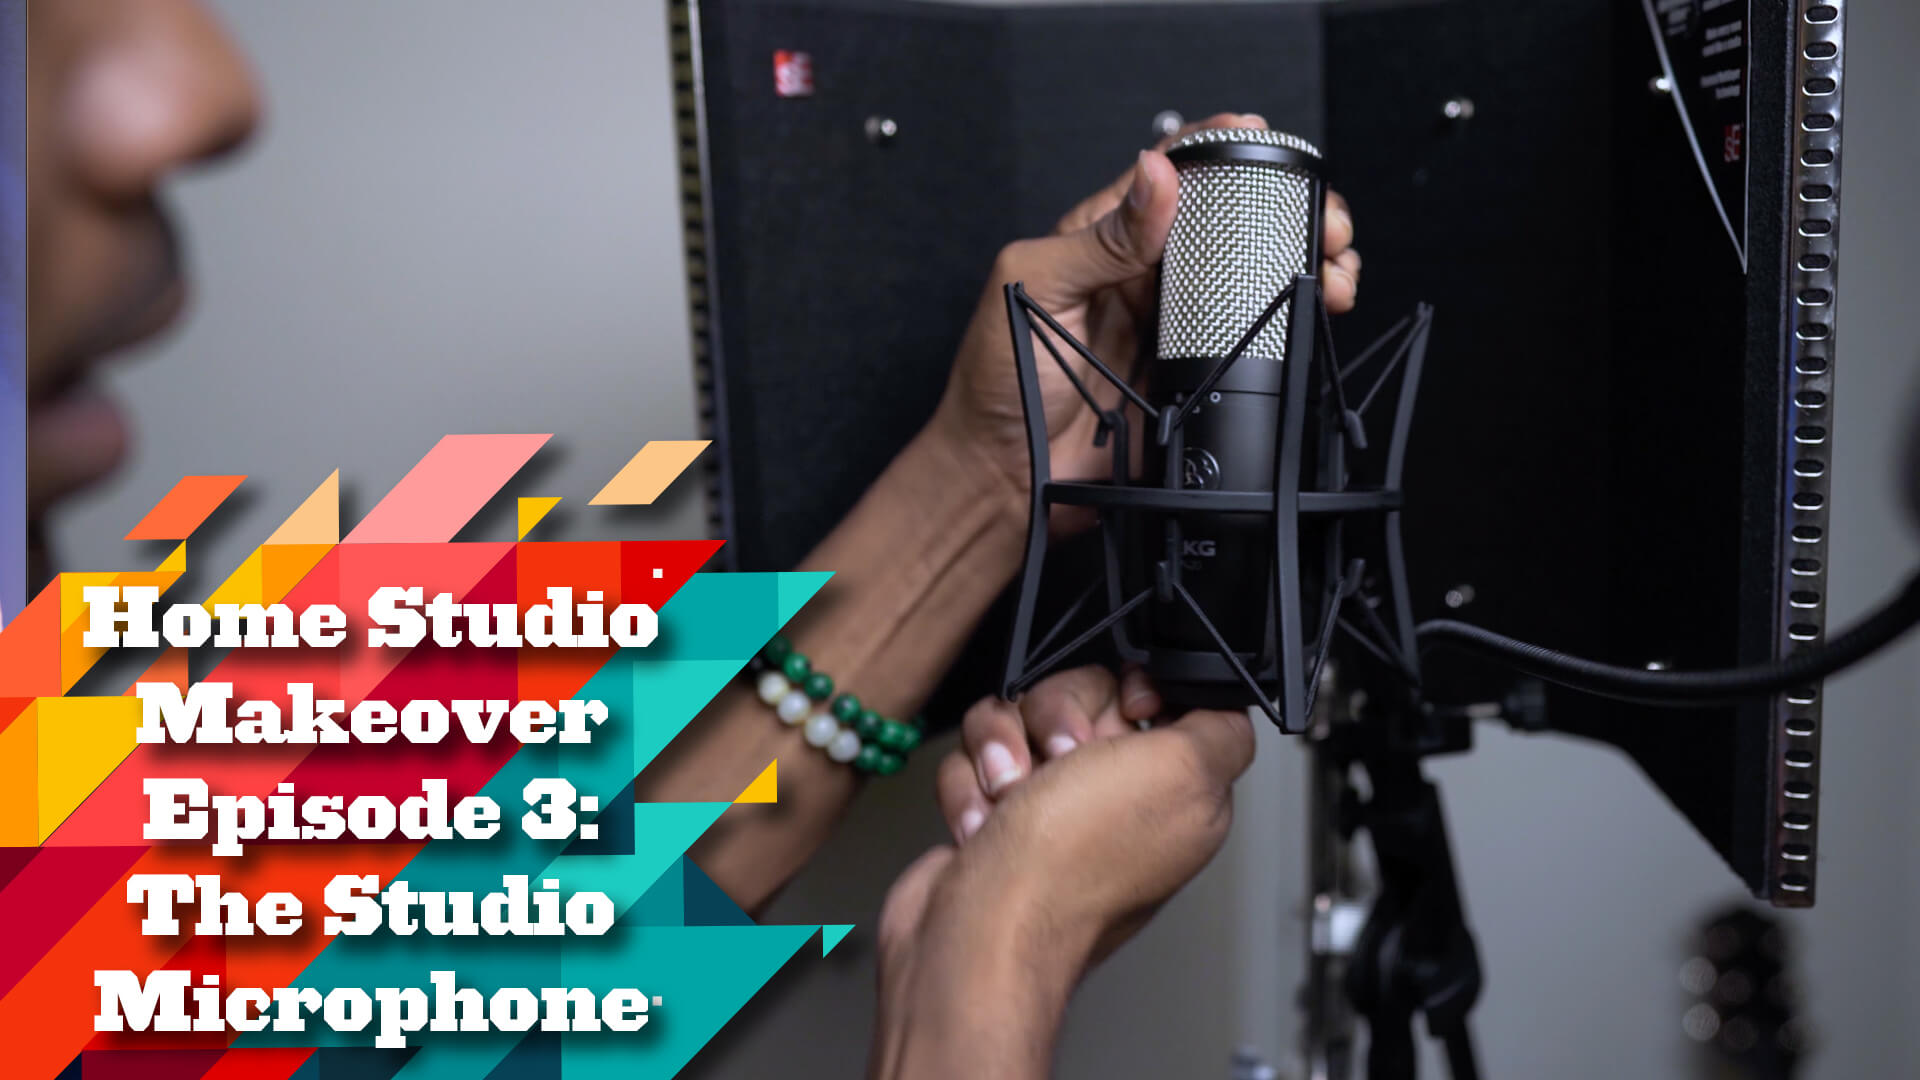 Home Studio Makeover: The Microphone